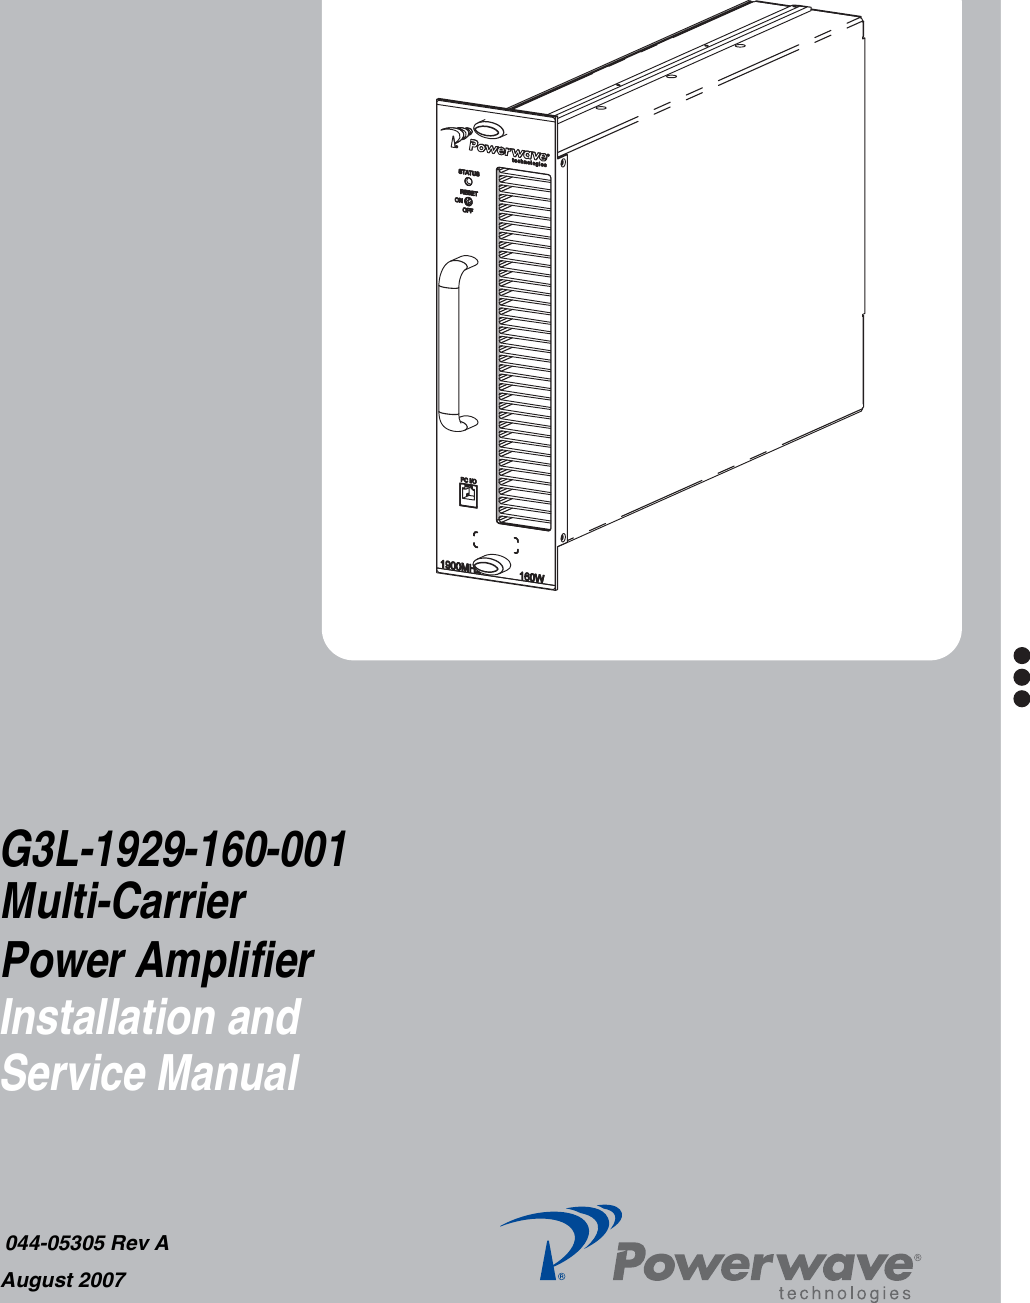 G3L-1929-160-001 Installation and Service Manual044-05305 Rev AAugust 2007Multi-CarrierPower Amplifier